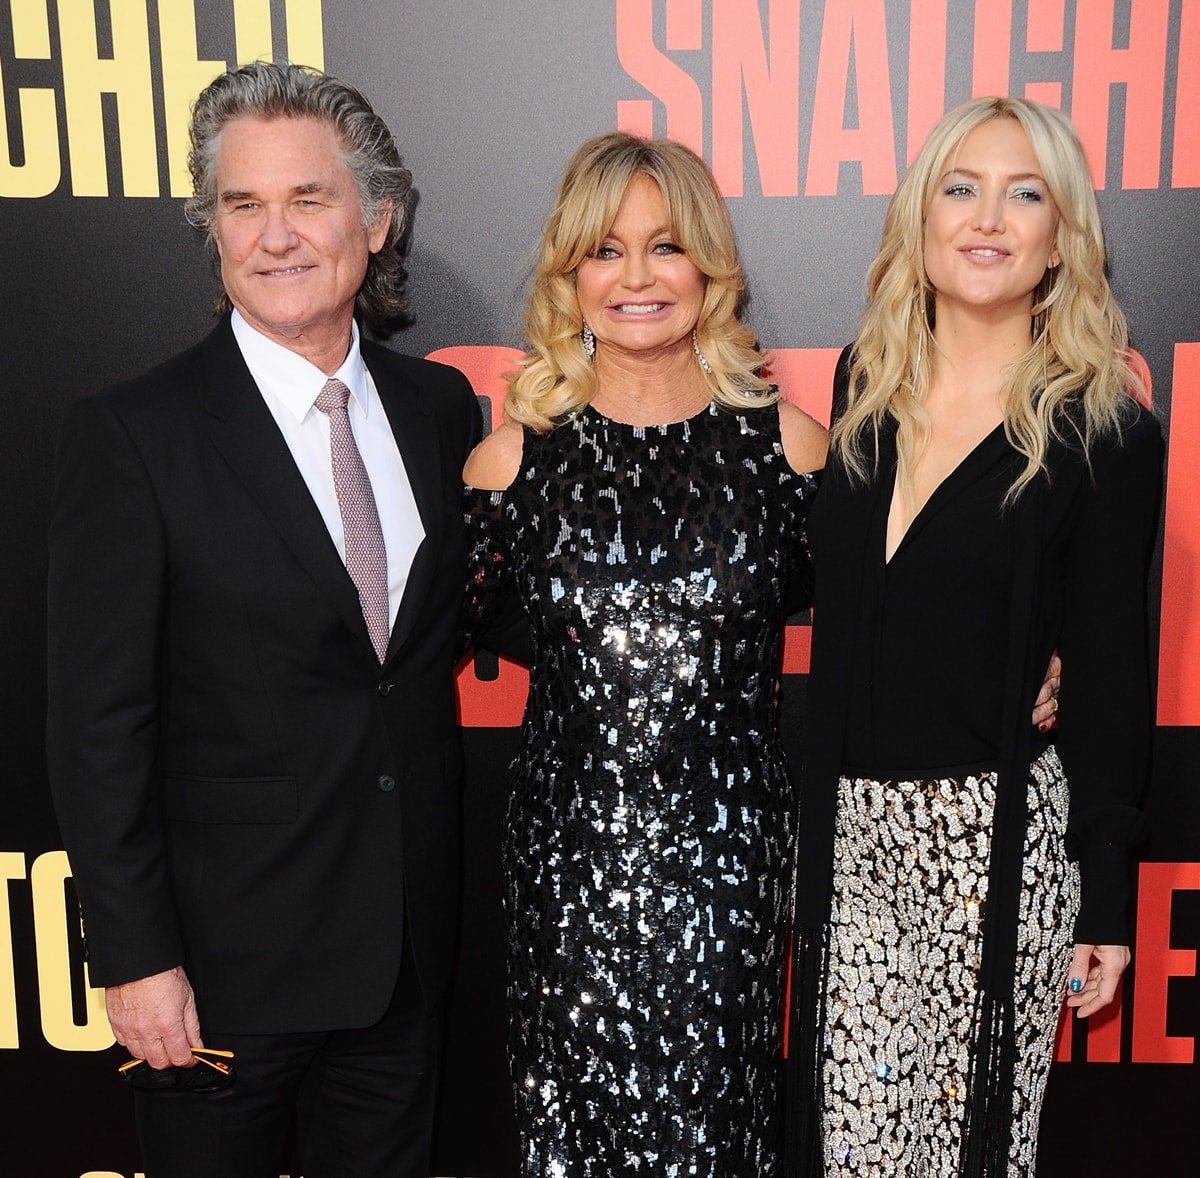 Kurt Russell and Goldie Hawn have been together since Valentine's Day in 1983 when Kate Hudson was 4 years old